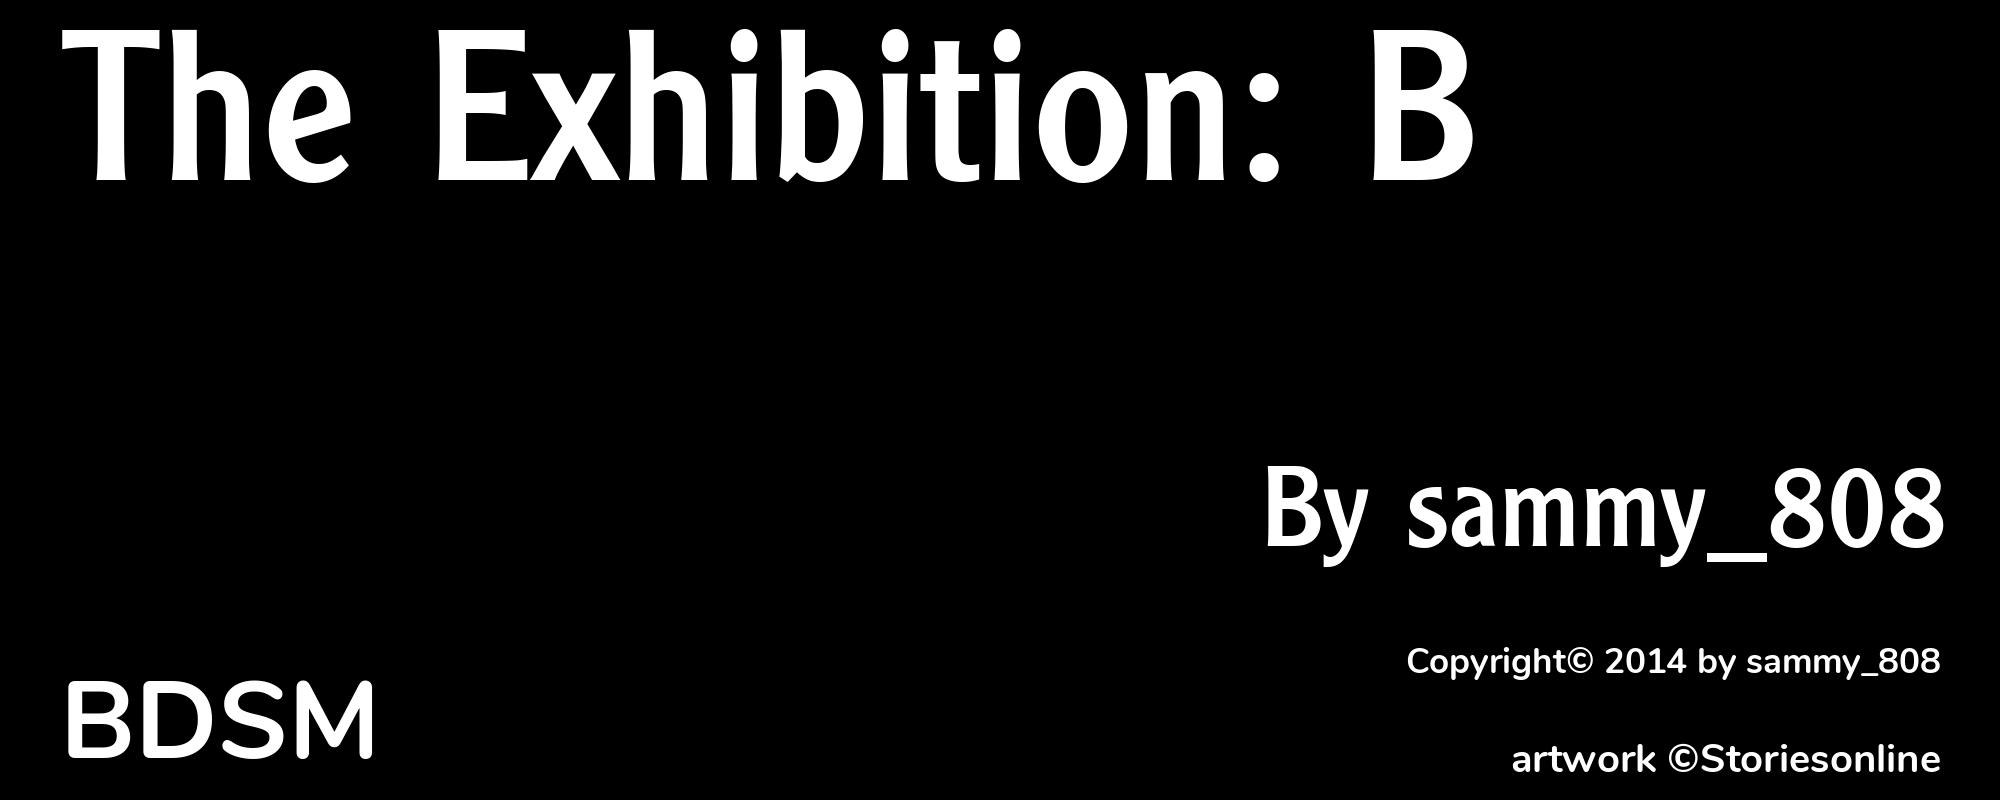 The Exhibition: B - Cover